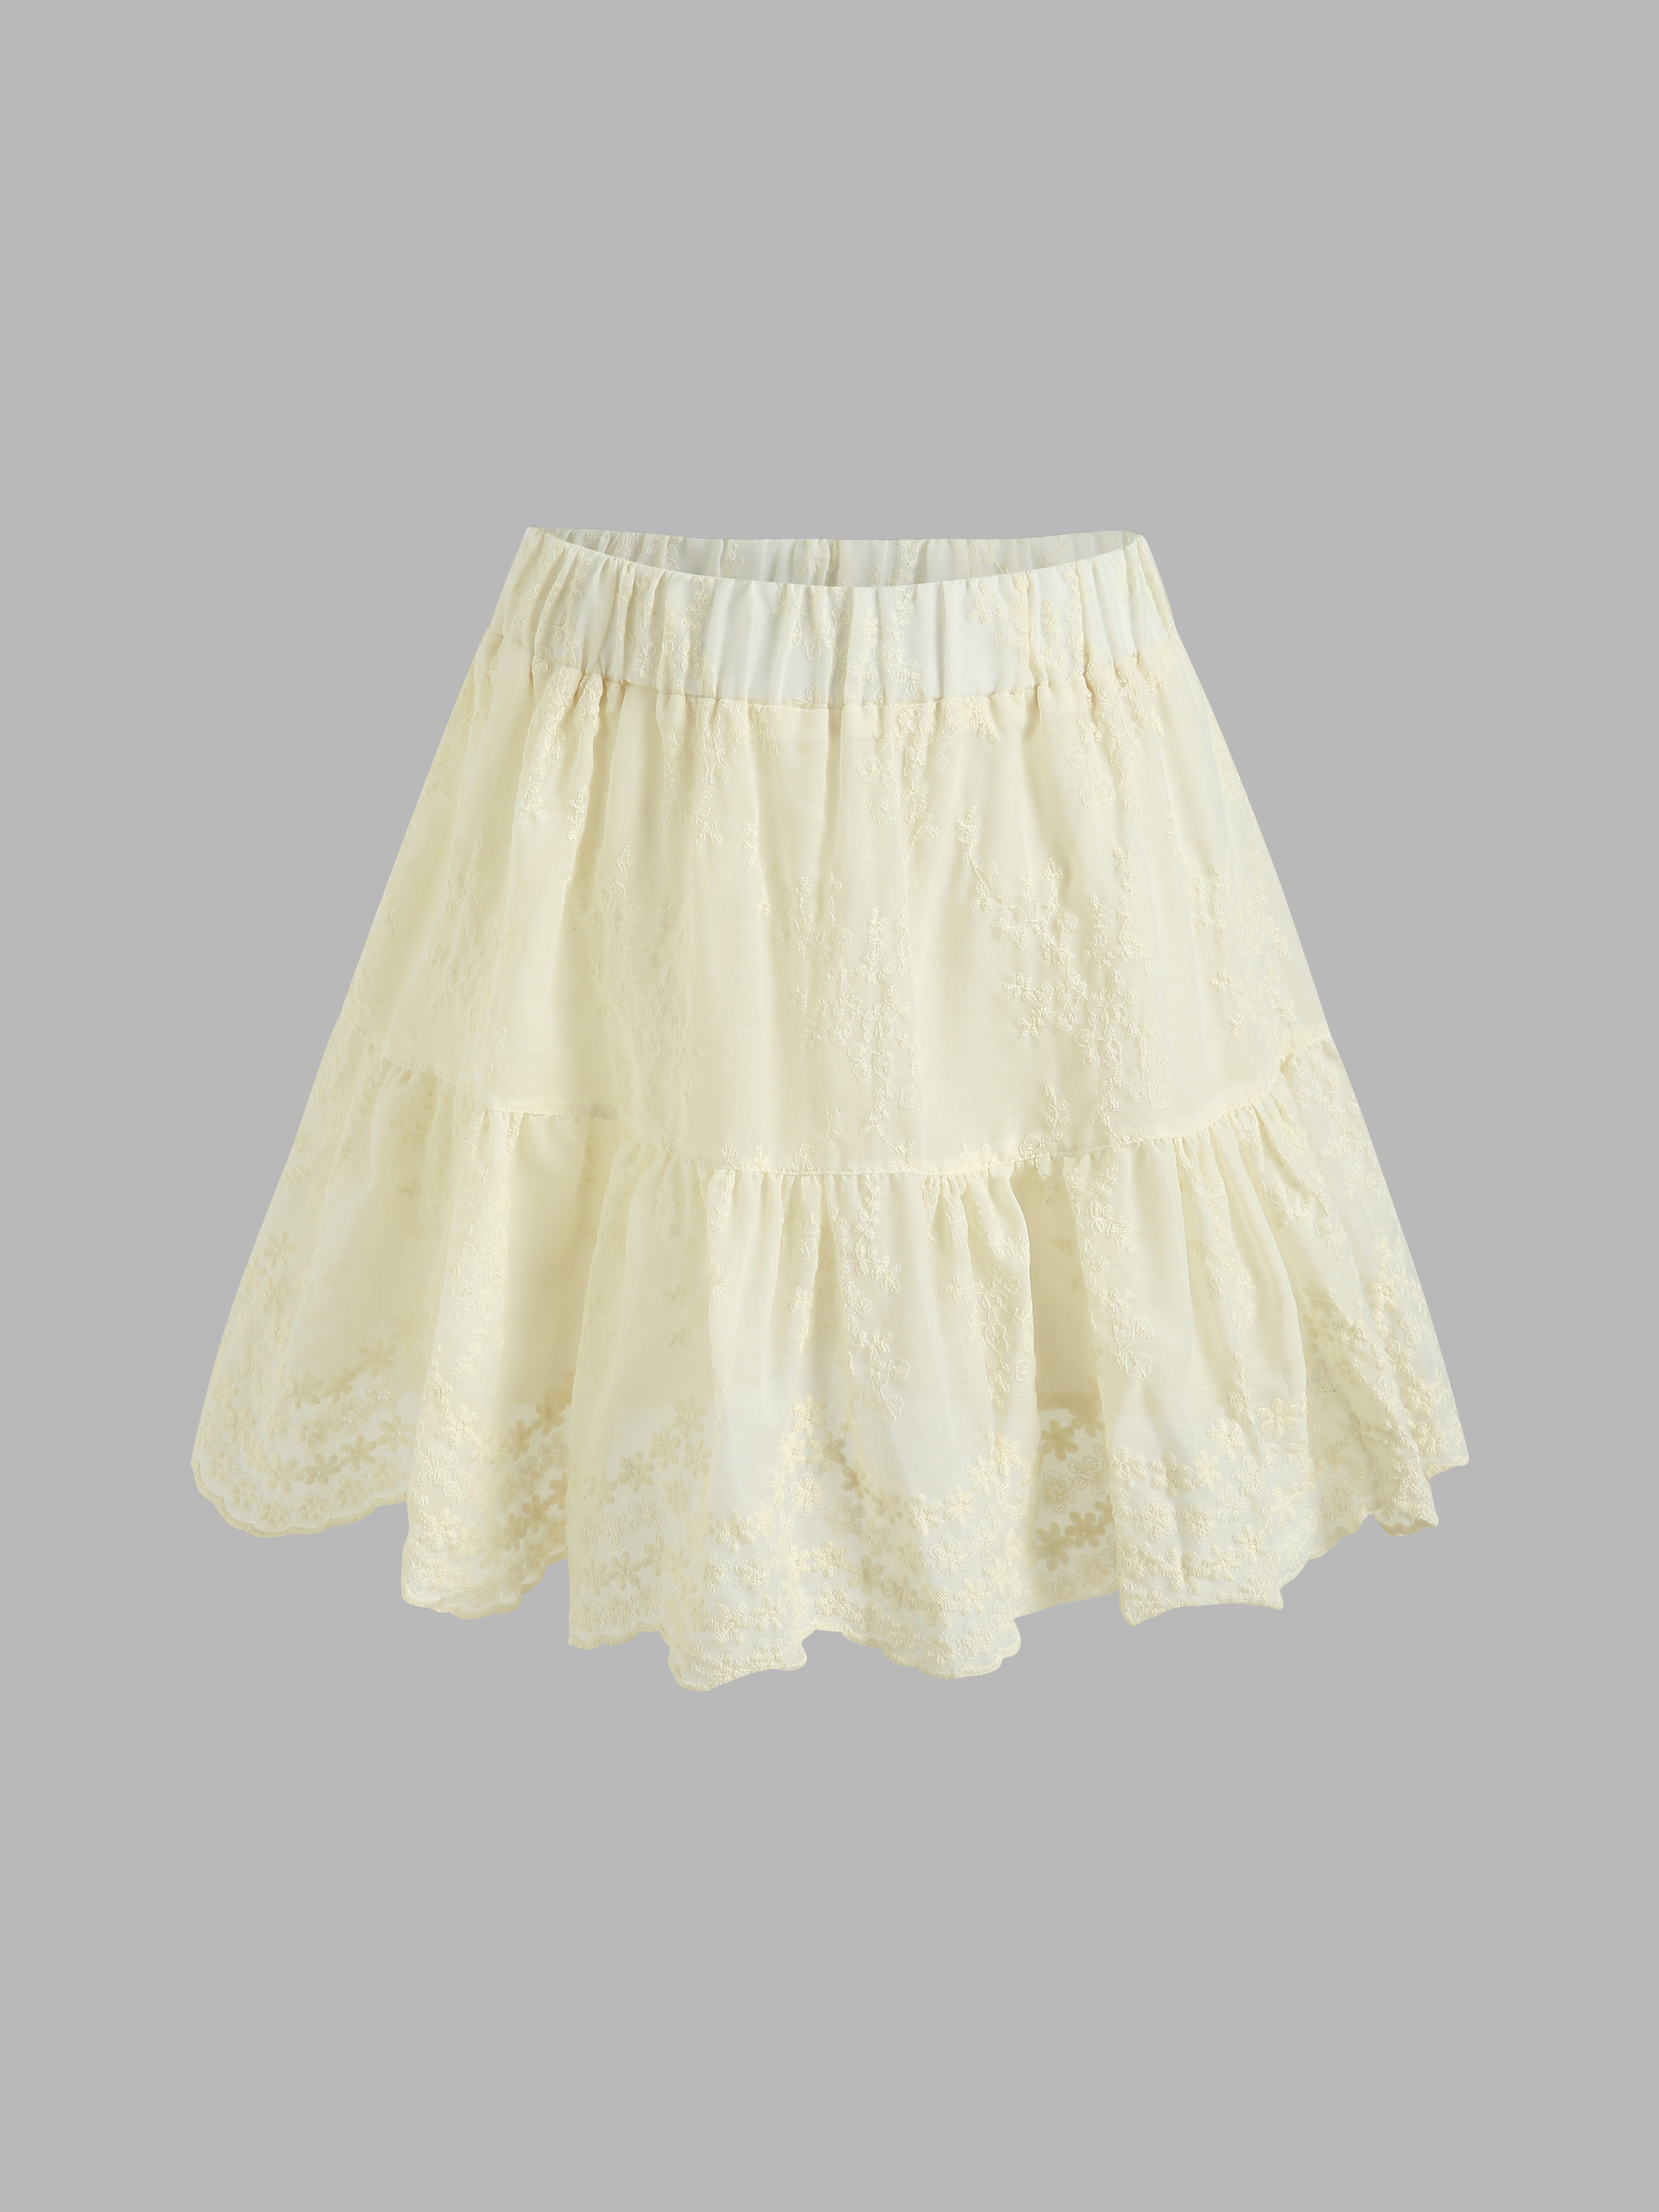 Floral Embroidery Tiered Mini Skirt - Cider